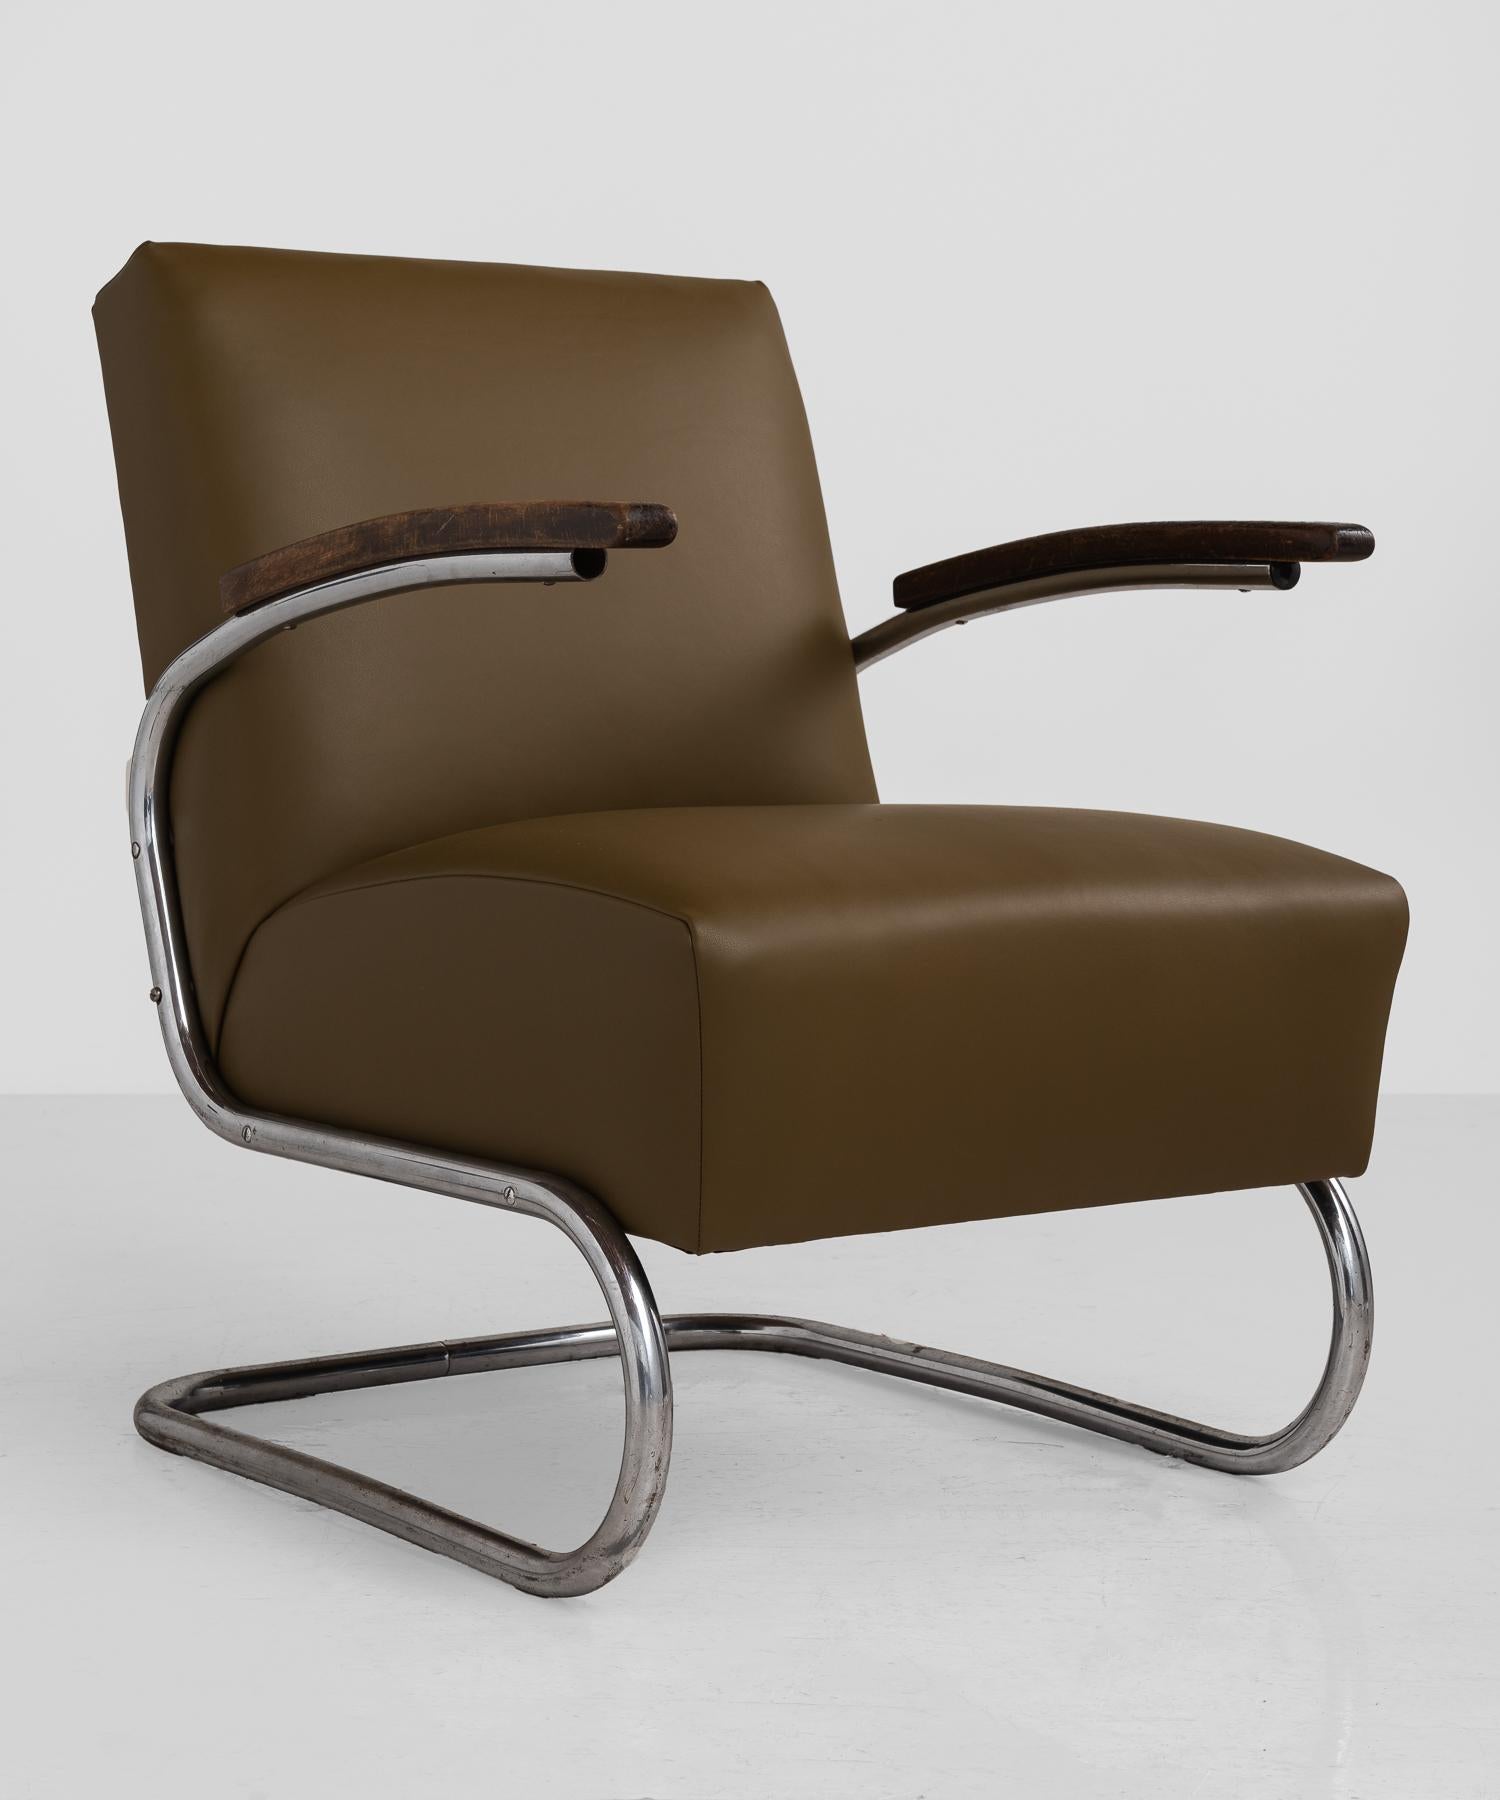 Thonet modern leather armchair, Germany, circa 1930.

Model SS41 Thonet armchair, newly reupholstered in woodrose leather by Maharam. Cantilever frame in chromed steel with wooden armrests.

Measures: 27.5